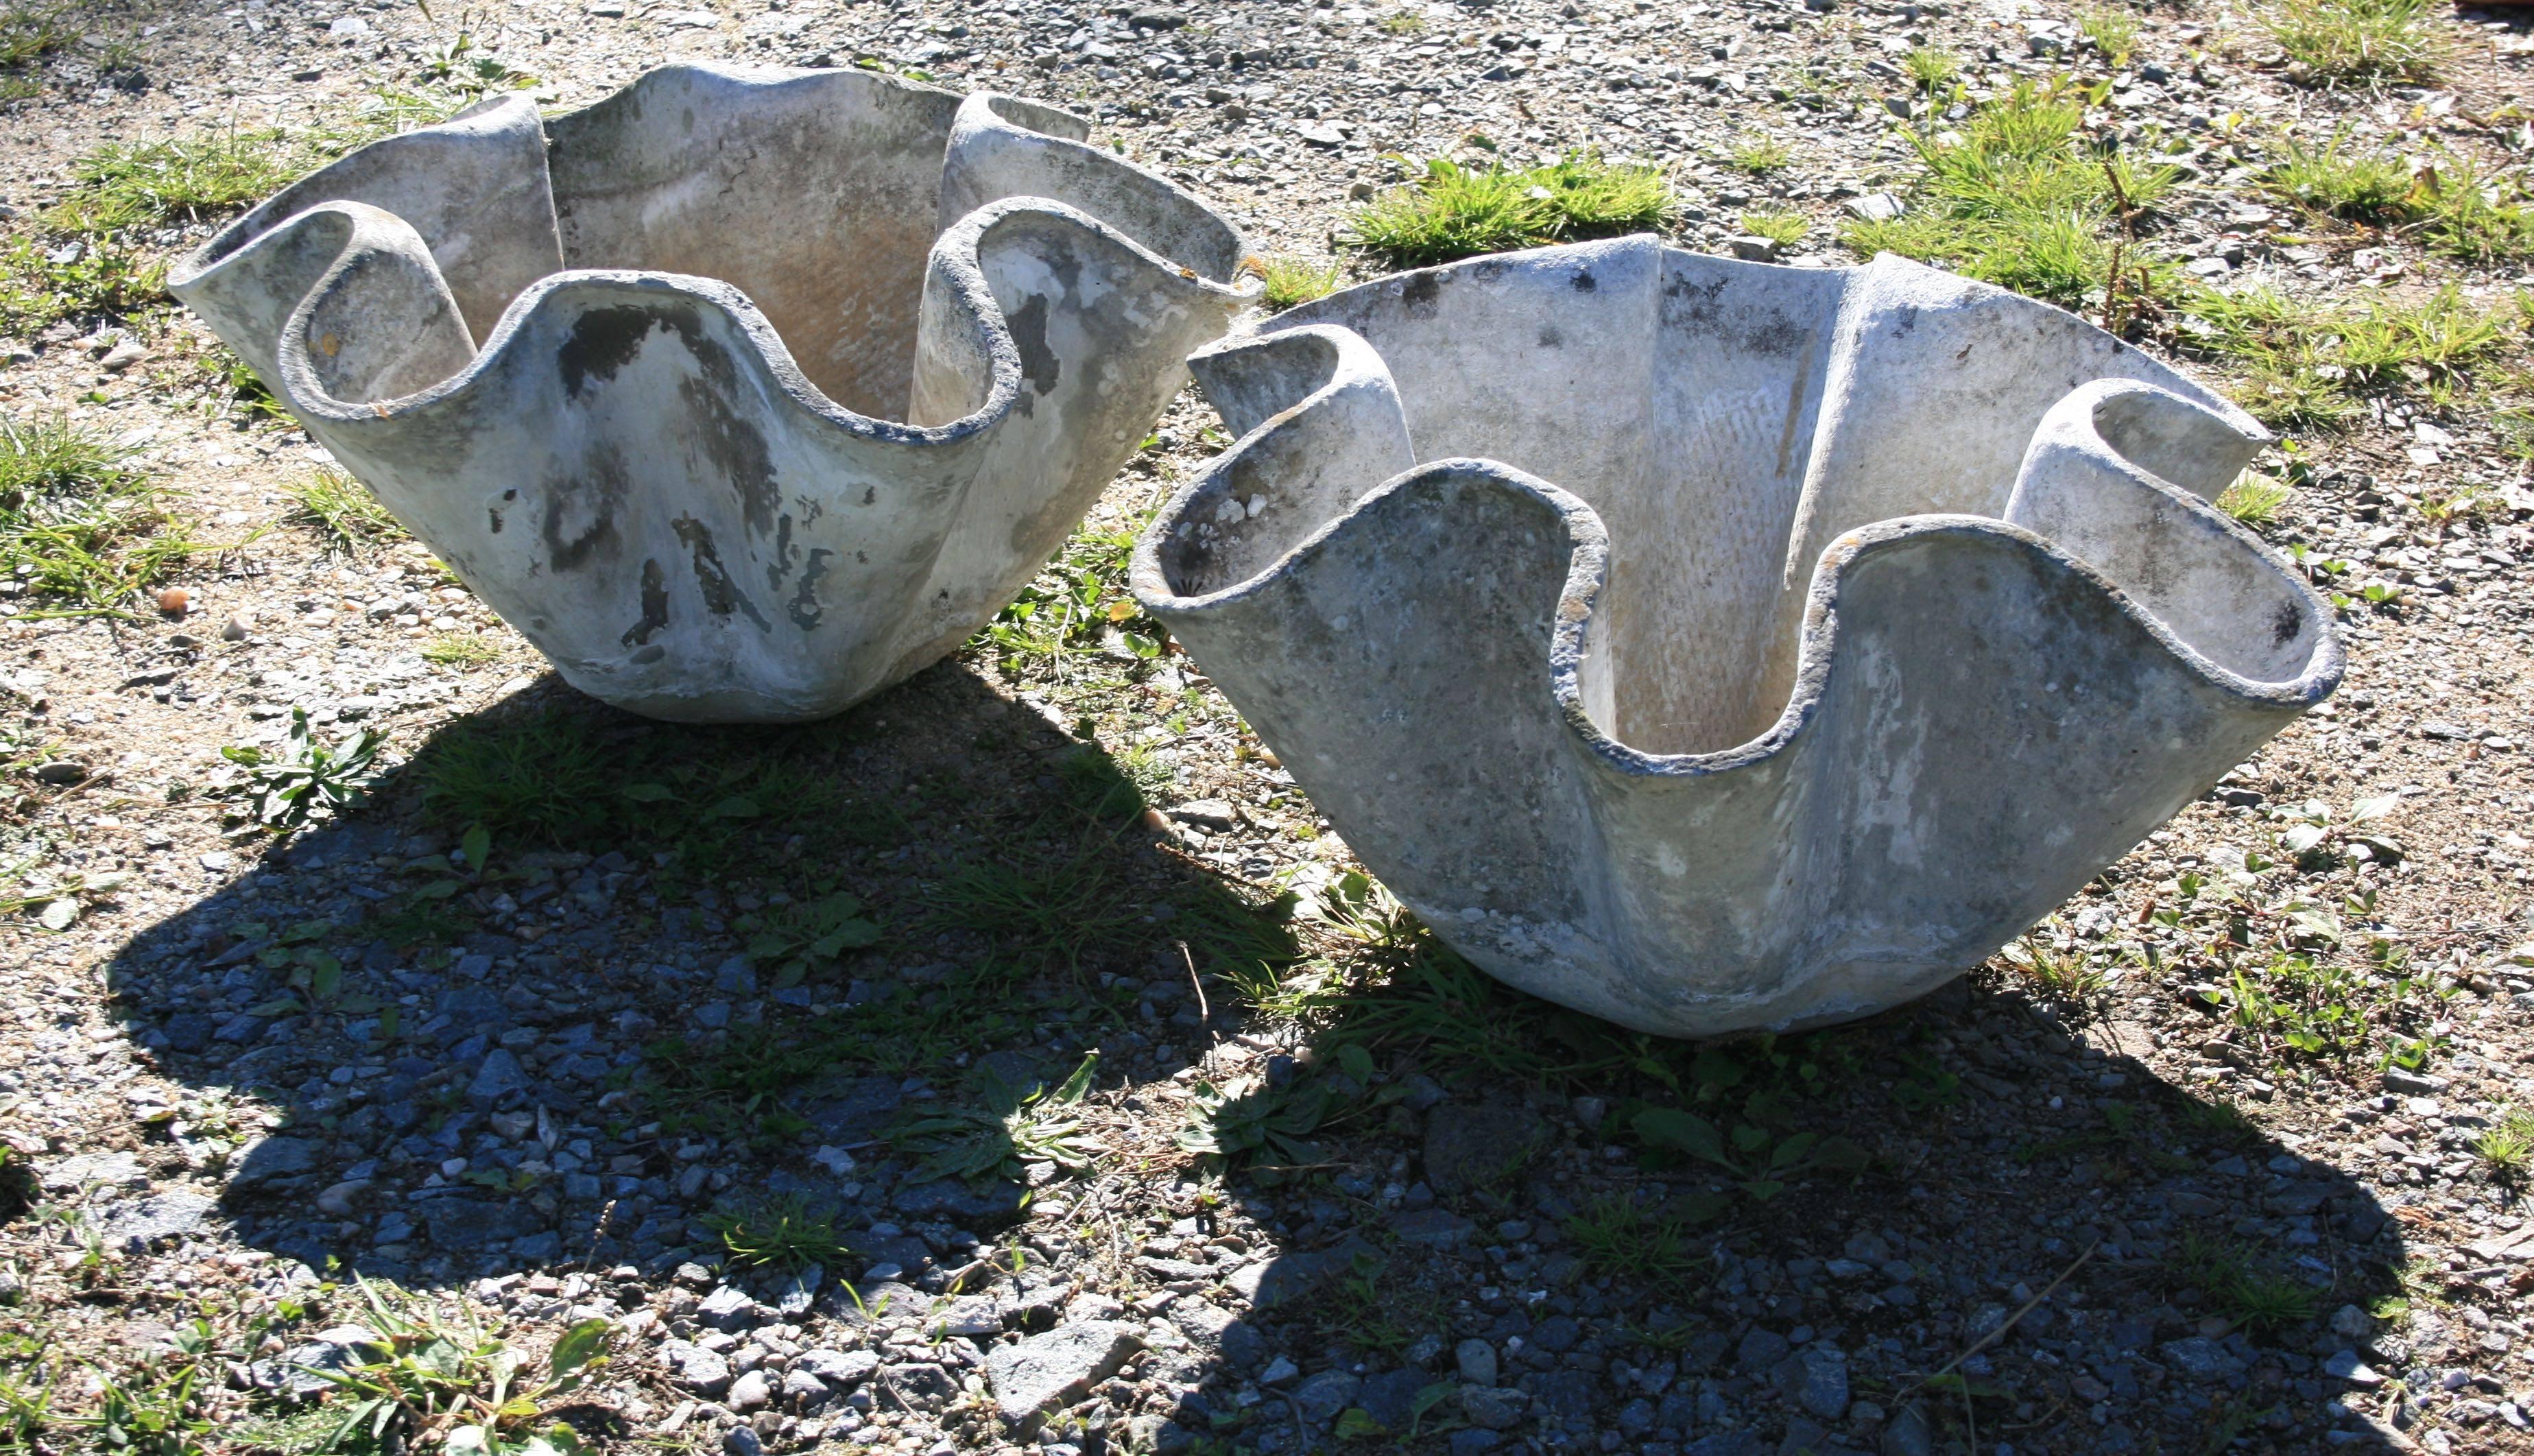 Willy Guhl designed his famed "Biomorphic Planters" in two sizes and these are the smaller of the two. They sport a wonderful weathered patina with traces of original white paint and bits of moss and are in excellent condition (excepting a